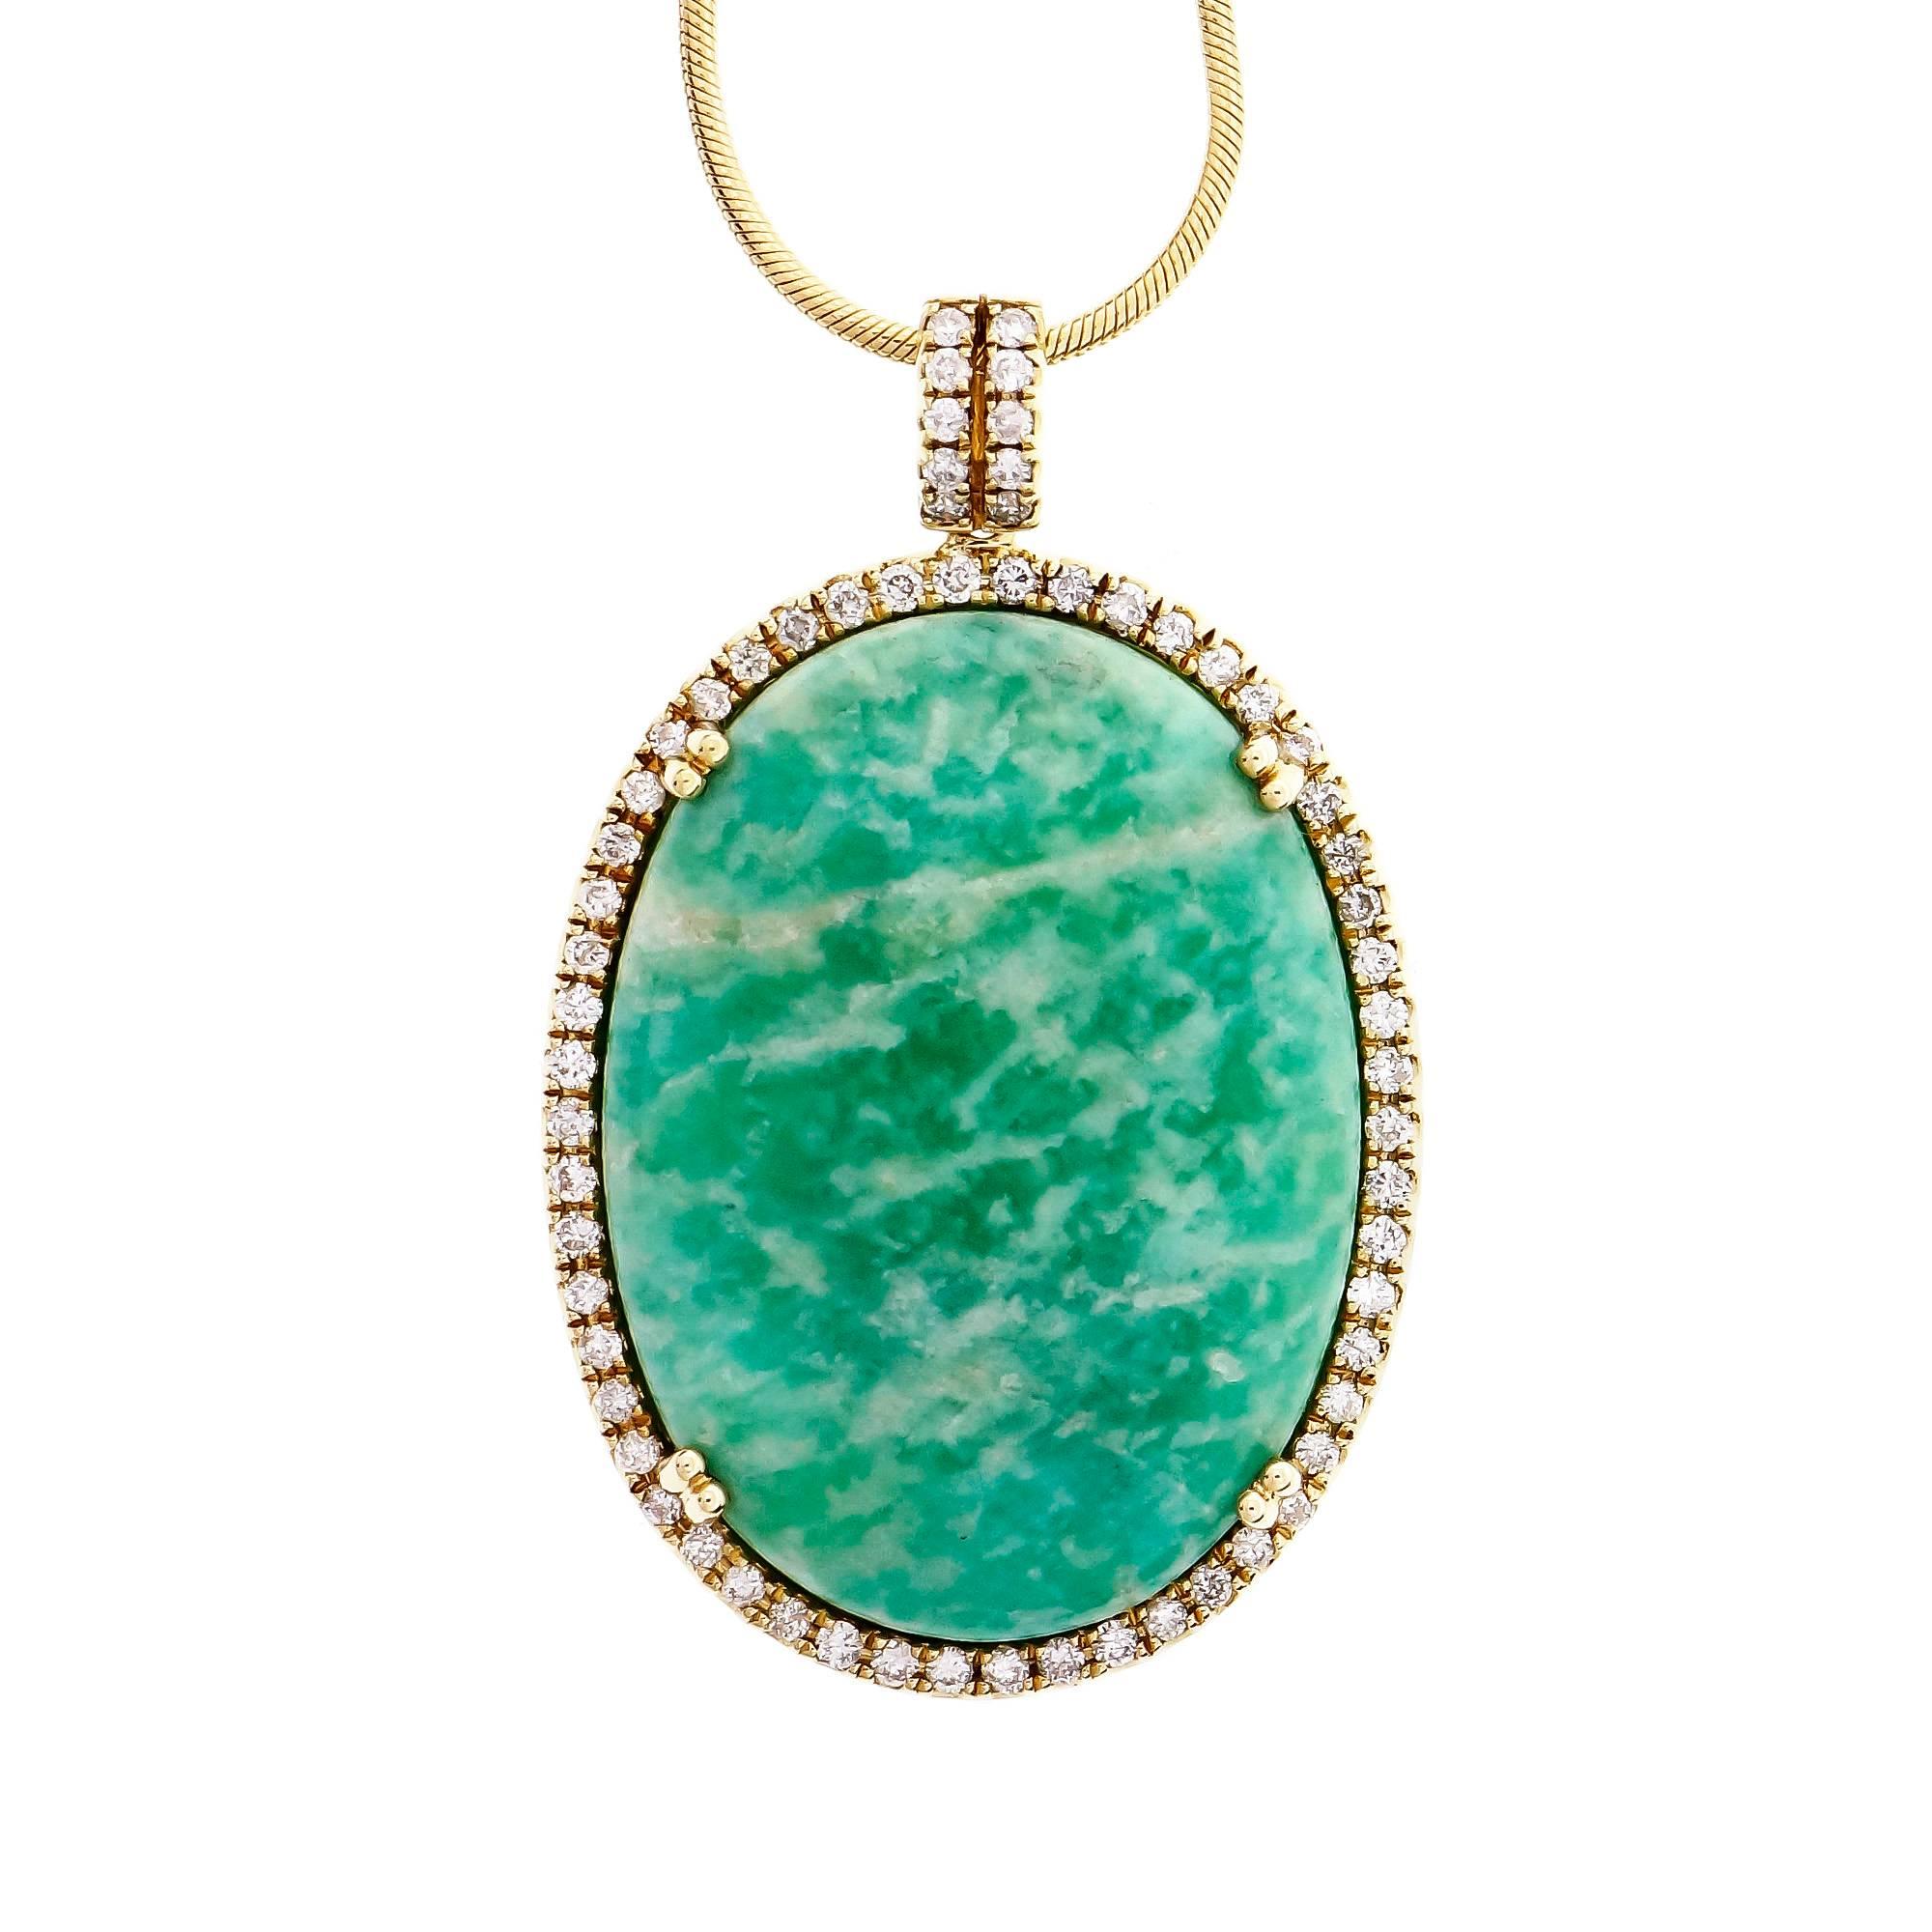 Natural bright green Amazonite pendant in 14k yellow gold with a rim of sparkly full cut Diamonds around the center stone. 18-inch snake chain with lobster catch.

1 oval bright green Amazonite, 29.93 x 22.19 x 4.9mm
64 round Diamonds, approx. total